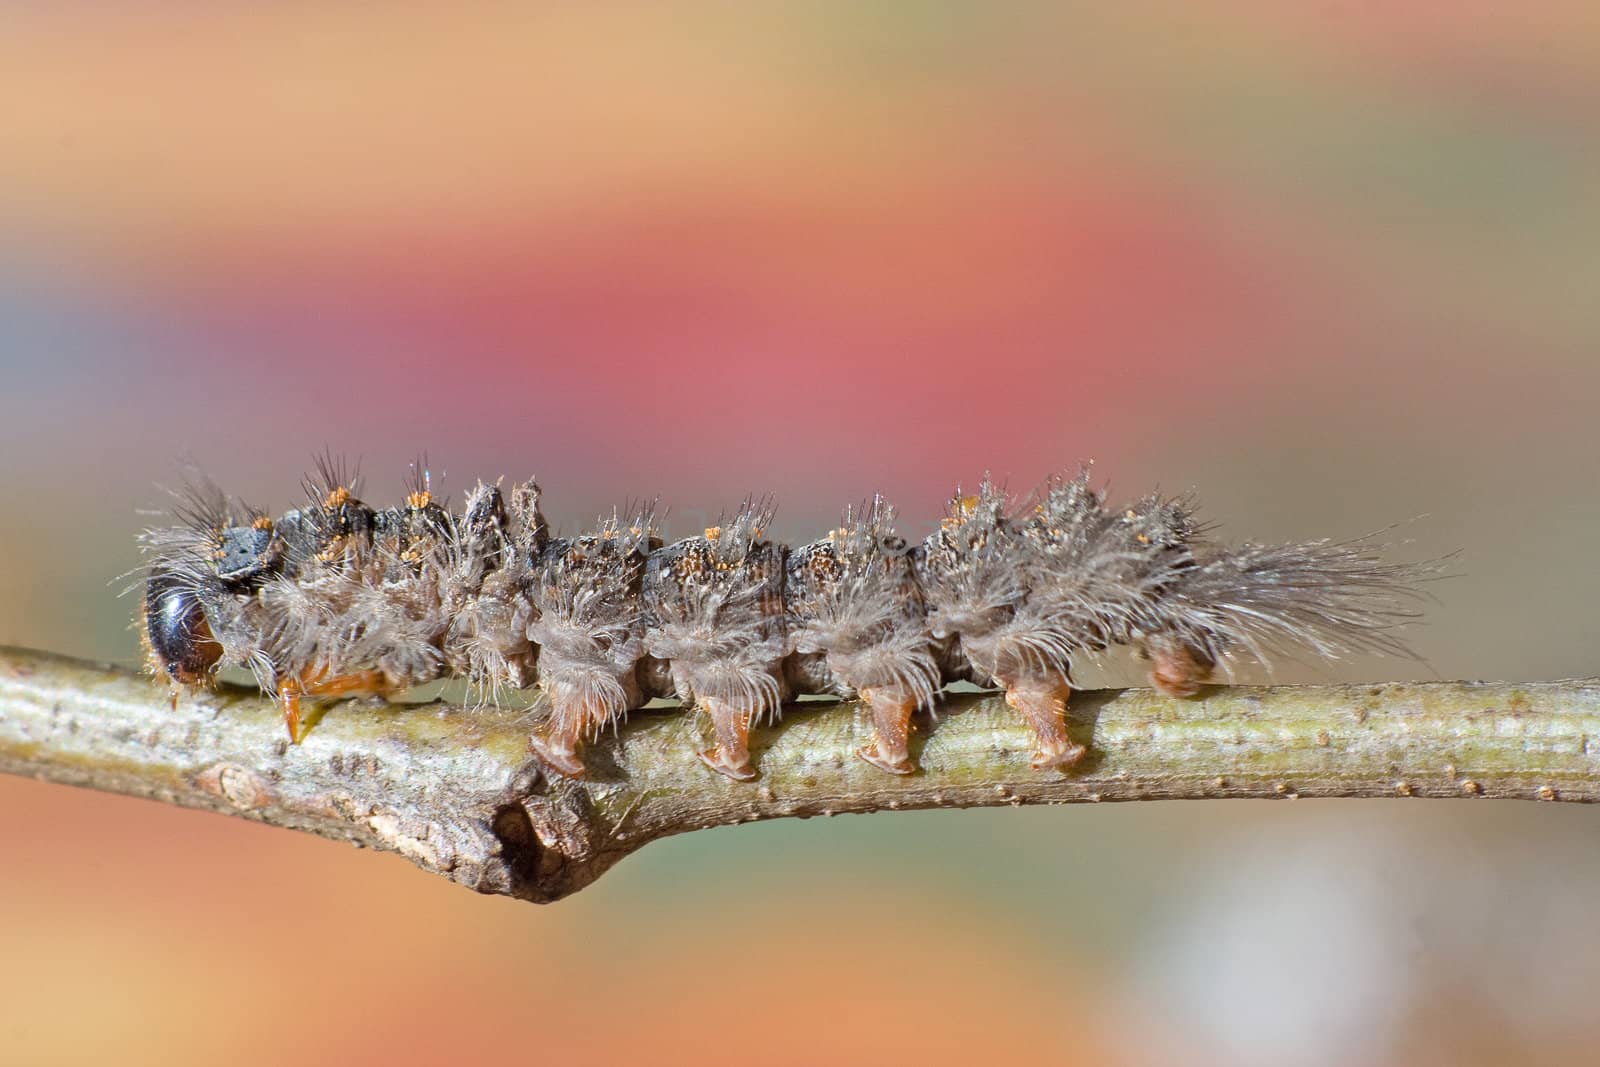 Hairy caterpillar on a twig photographed with 40mm lens and bellows .